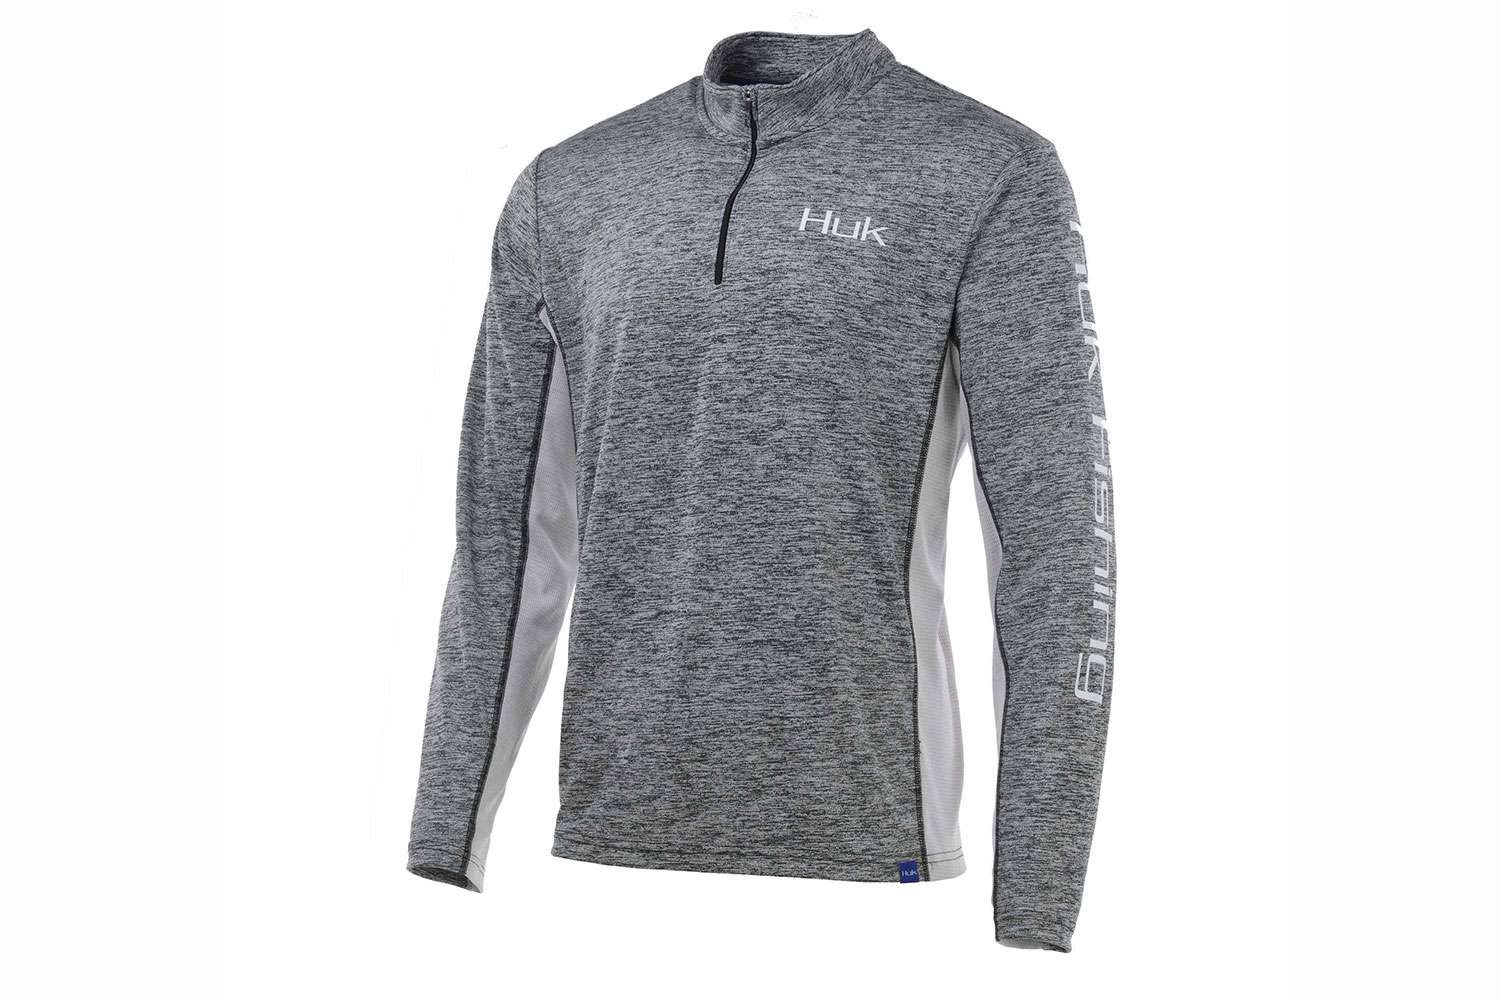 <p><b>Huk Icon X Cold Weather 1/4-Zip</b></p>
The shirt features hollow core warming fibers trap heat and actively warm the body
4 way stretch, and UPF 50+ for sun protection. It is DWR coated to repel water and keep stains away for years of enjoyment. Itâs available in long sleeve, quarter zip and hoodie. <br>
<p><b>MSRP: $55-$65</b></p>
<a href=